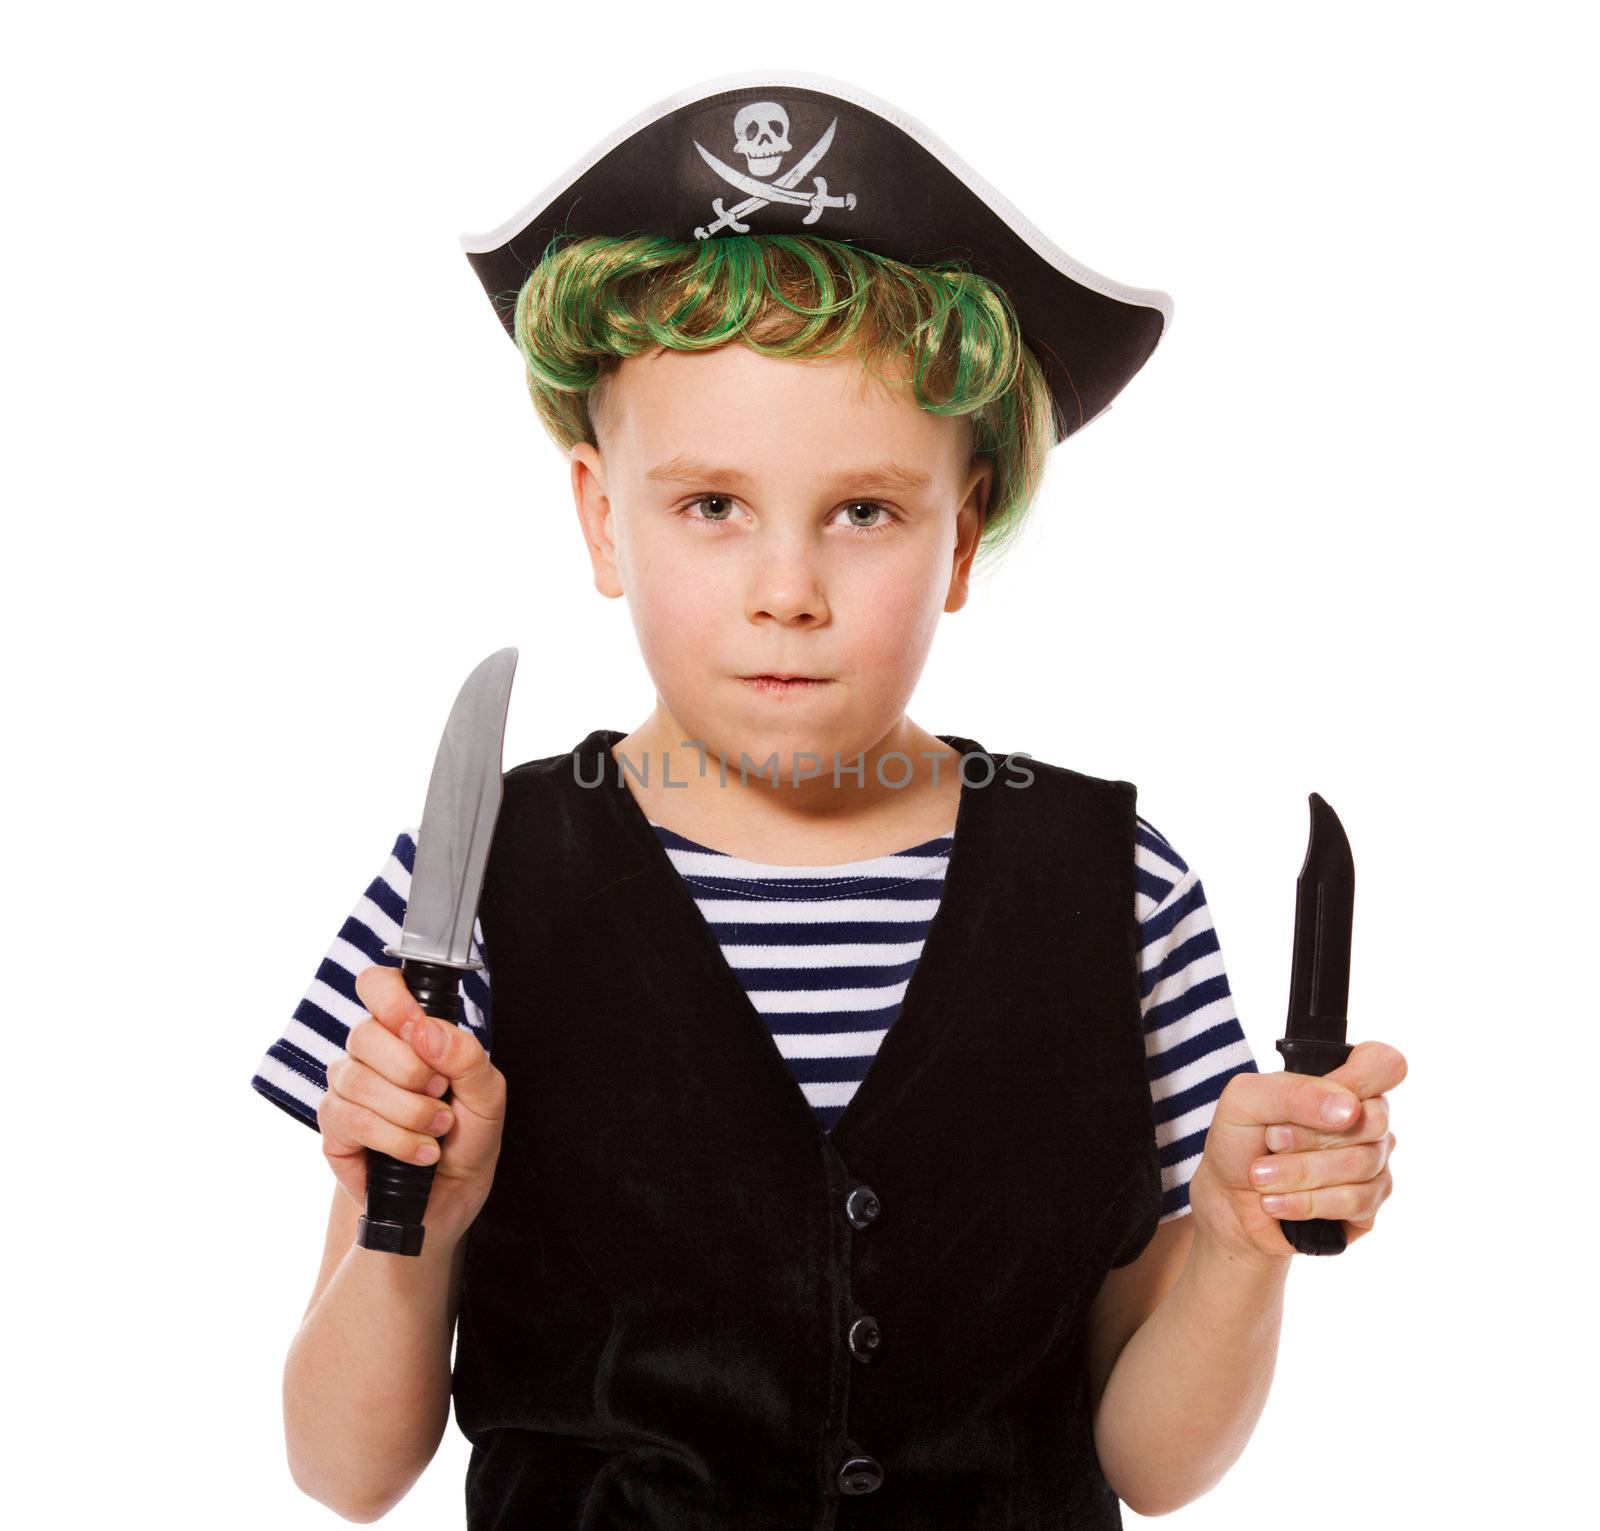 Boy wearing pirate costume holding knifes isolated on white